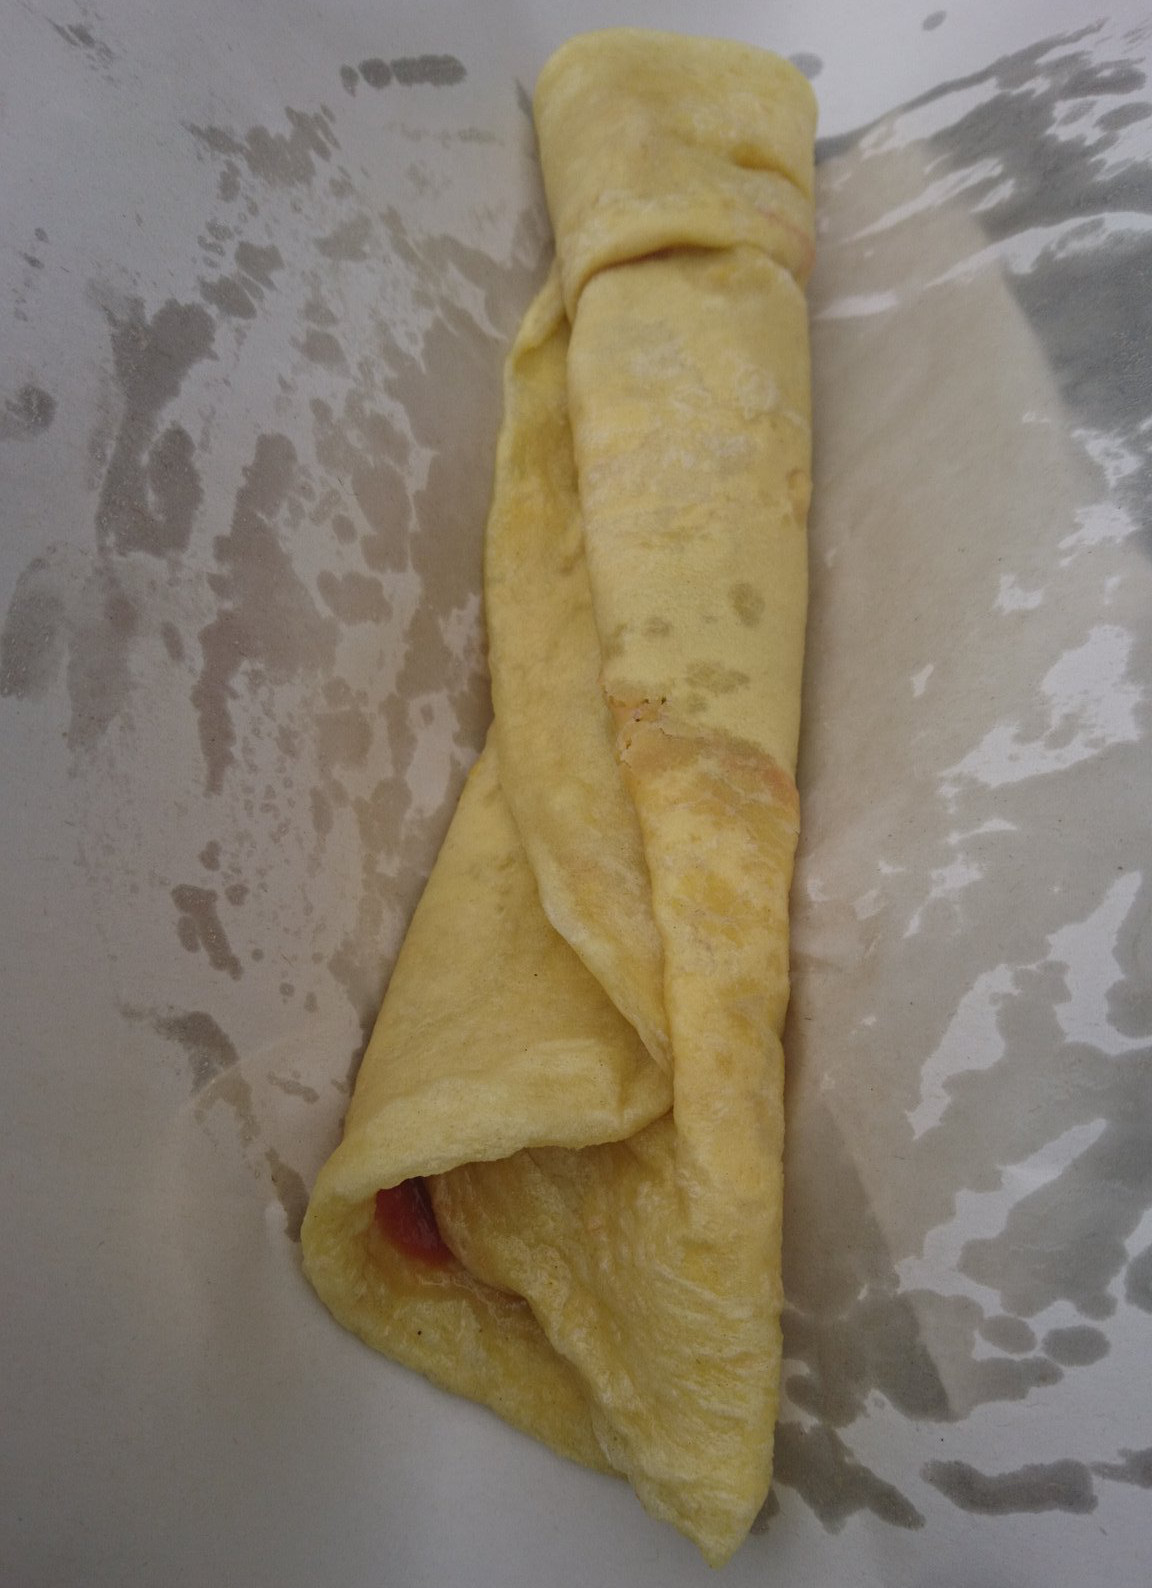 A soft, flexible flatbread rolled up and placed in a paper wrapping.